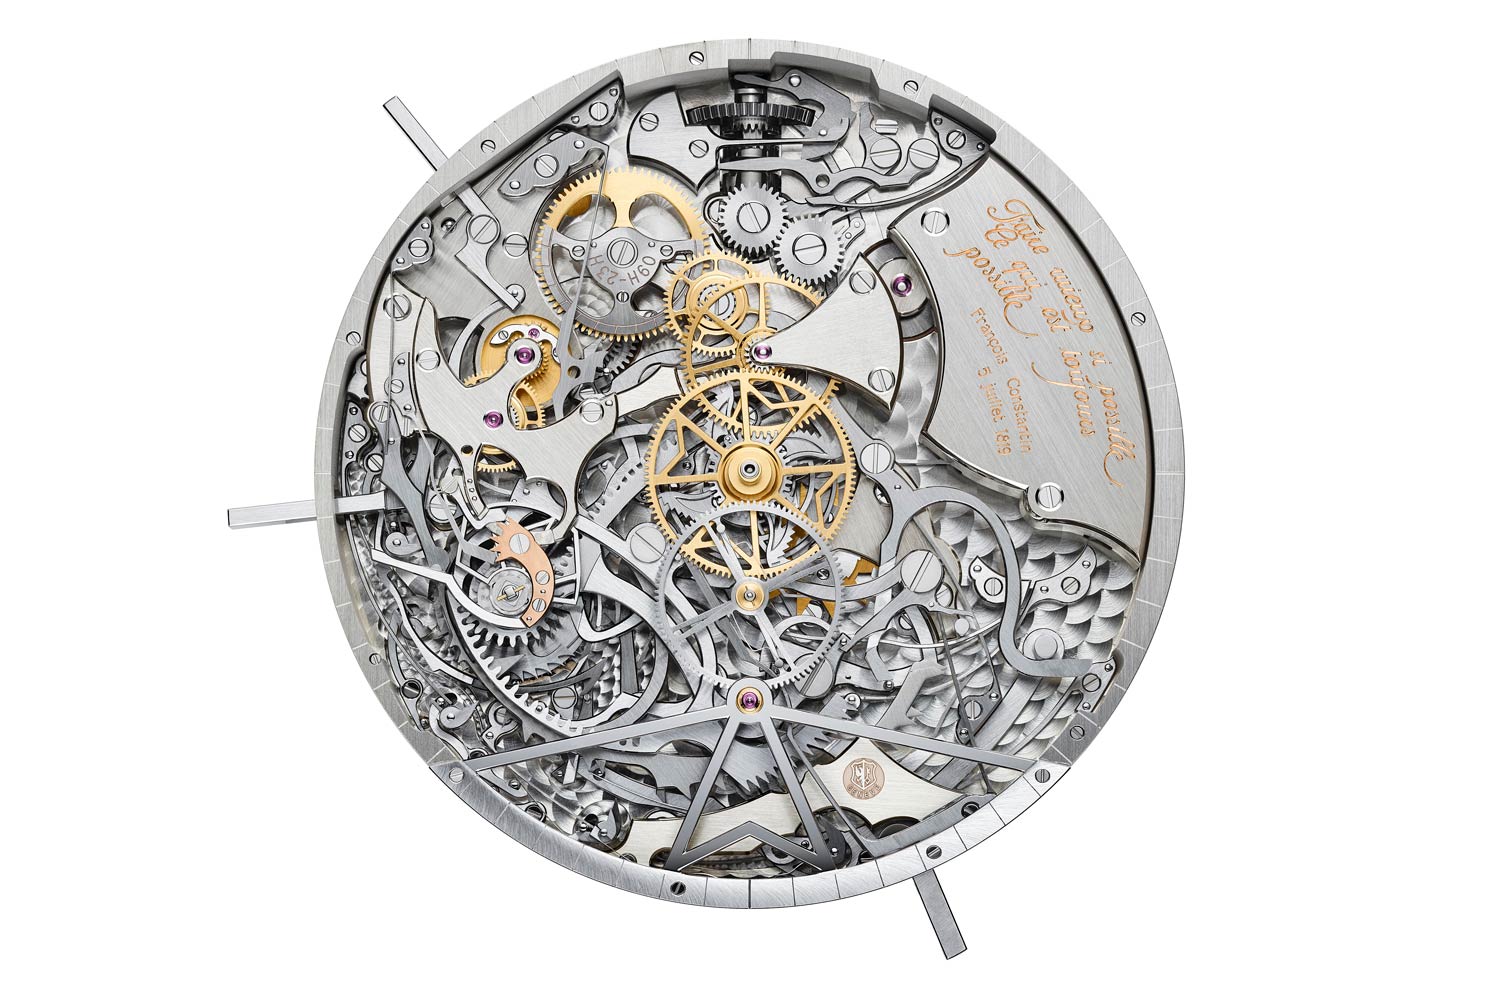 The Calibre 3761 measures 71 mm in diameter and is 17 mm thick The two barrels promise at least 16 hours of power reserve for the musical mechanism in "Grande Sonnerie" mode and 80 hours for the time indications.